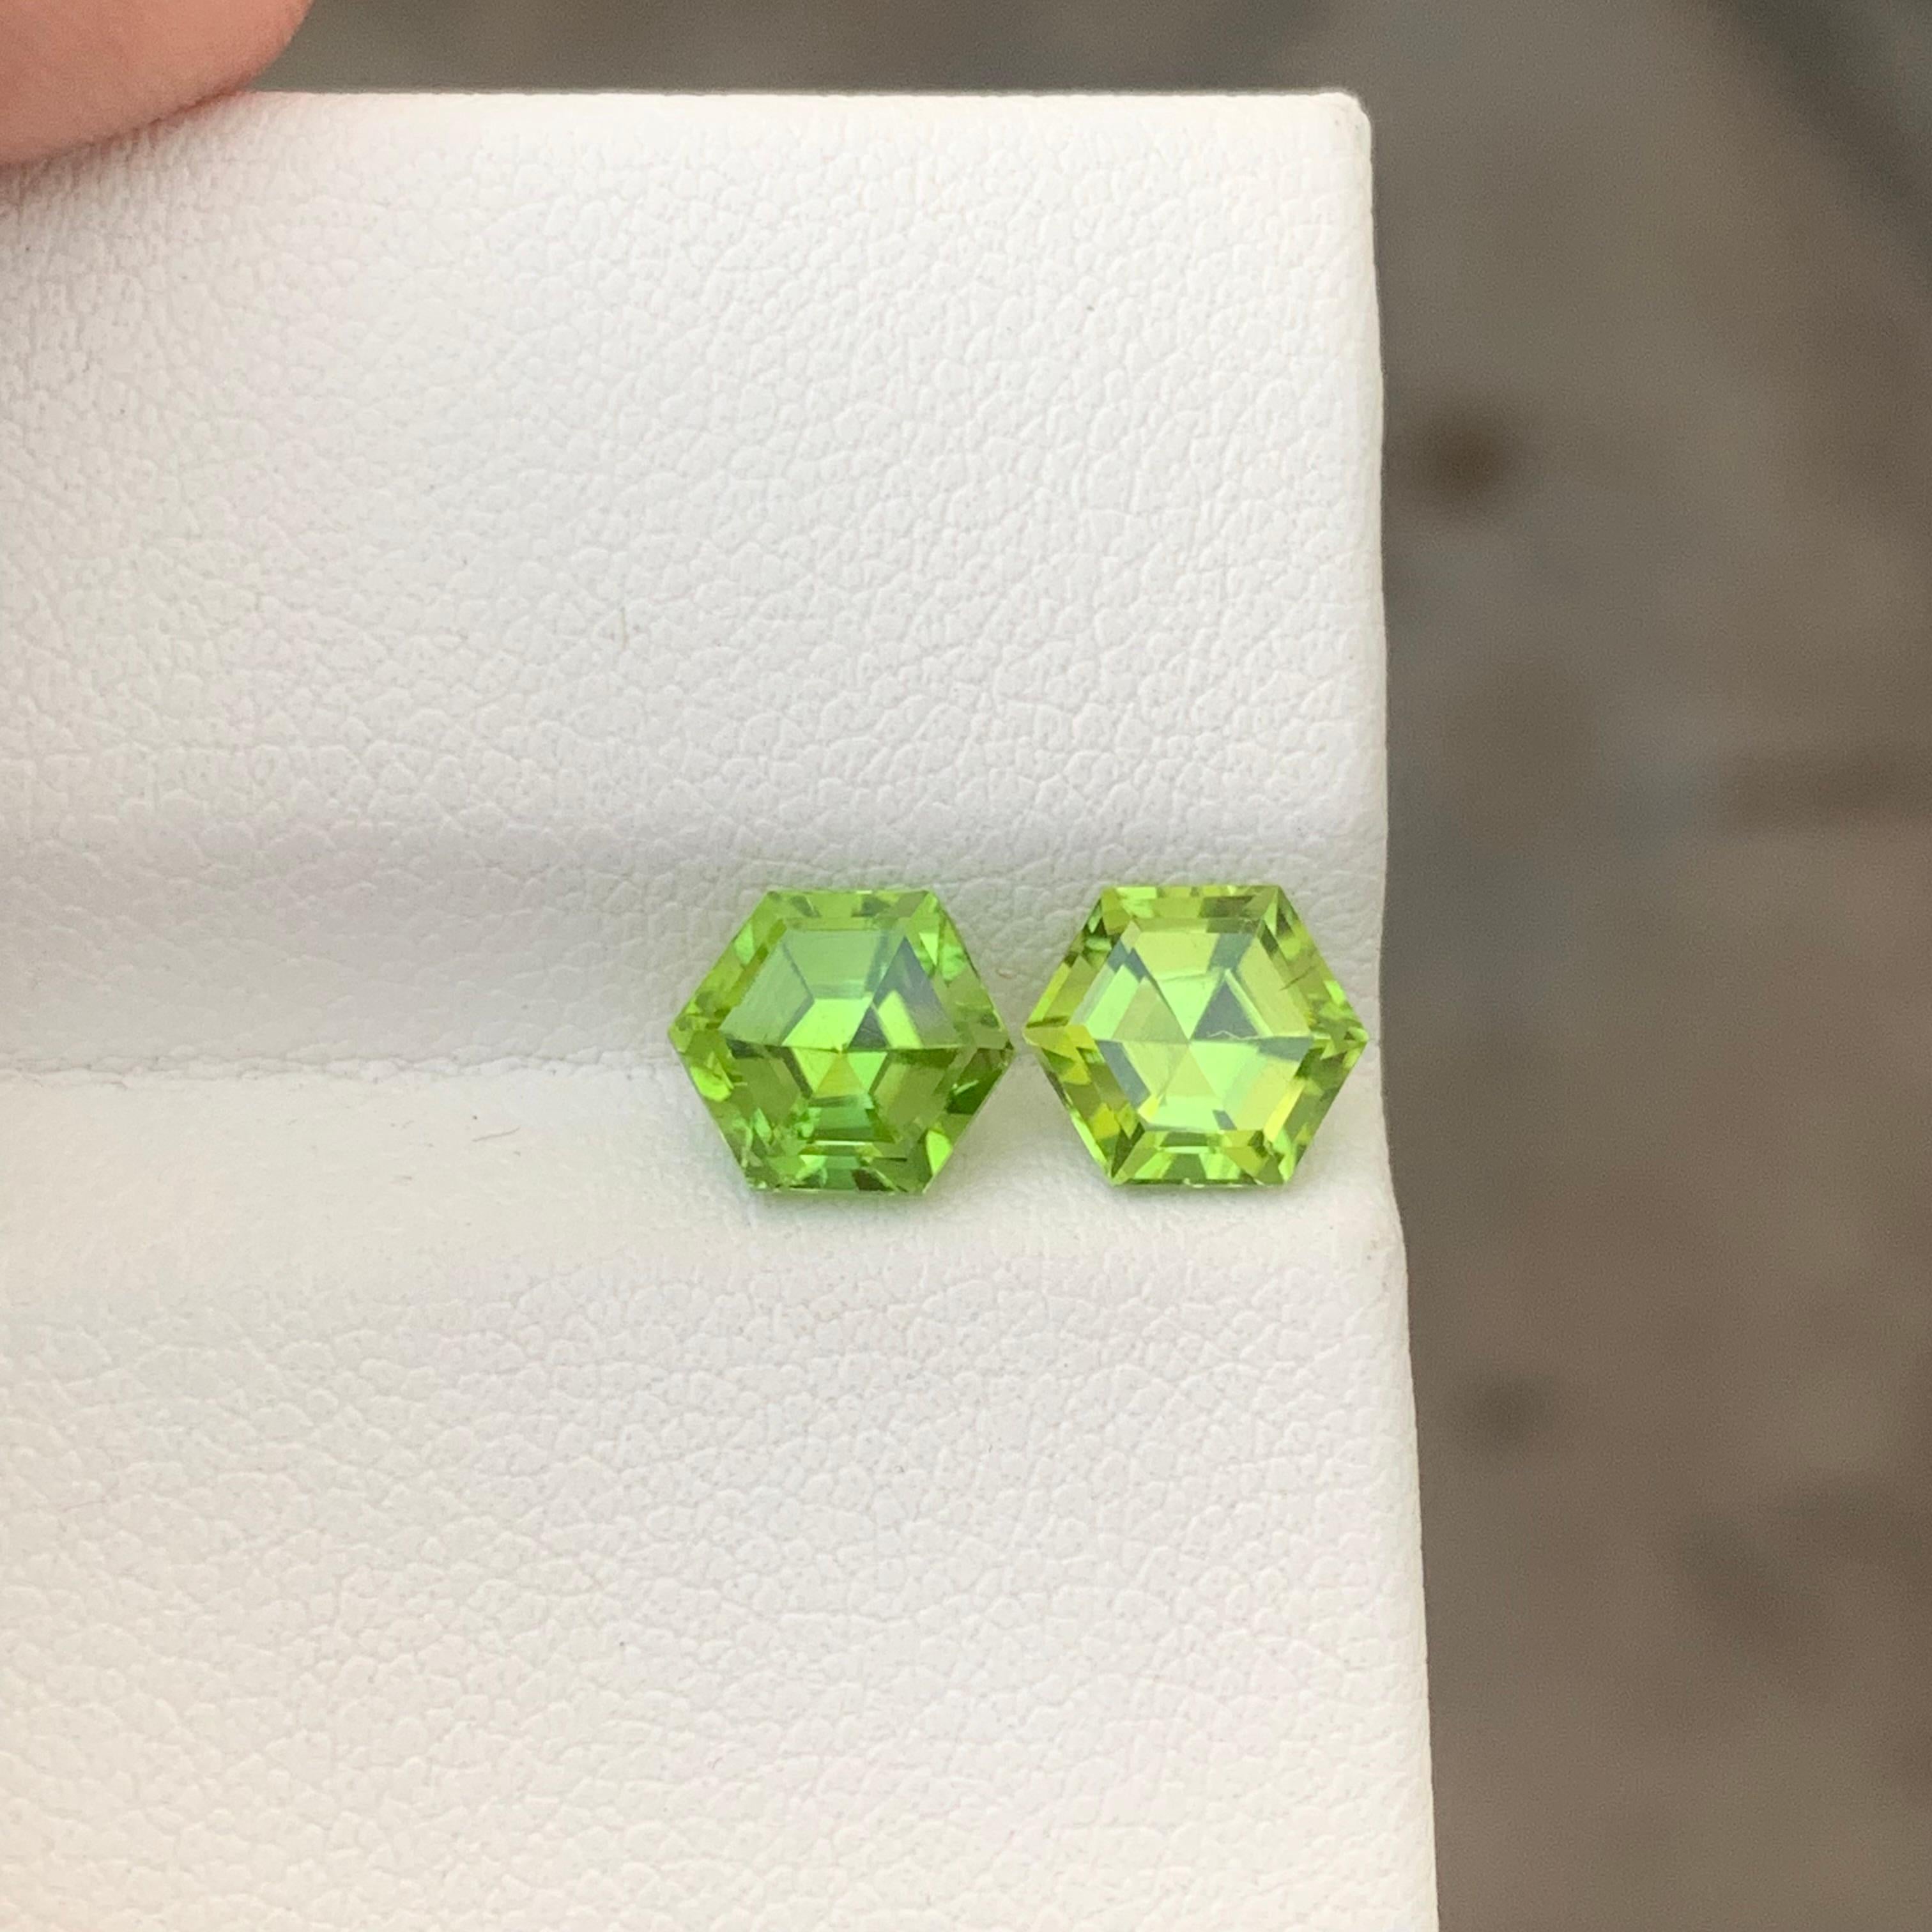 Gemstone Type : Peridot Pairs
Weight : 3.05 Carats
Dimension: 6.6x6.6x4.6 & 5.3 Mm 
Origin : Suppat Valley Pakistan
Clarity : Eye Clean
Certificate: On Demand
Color: Green
Treatment: Non
Shape: Hexagon
It helps cure diseases related to lungs,